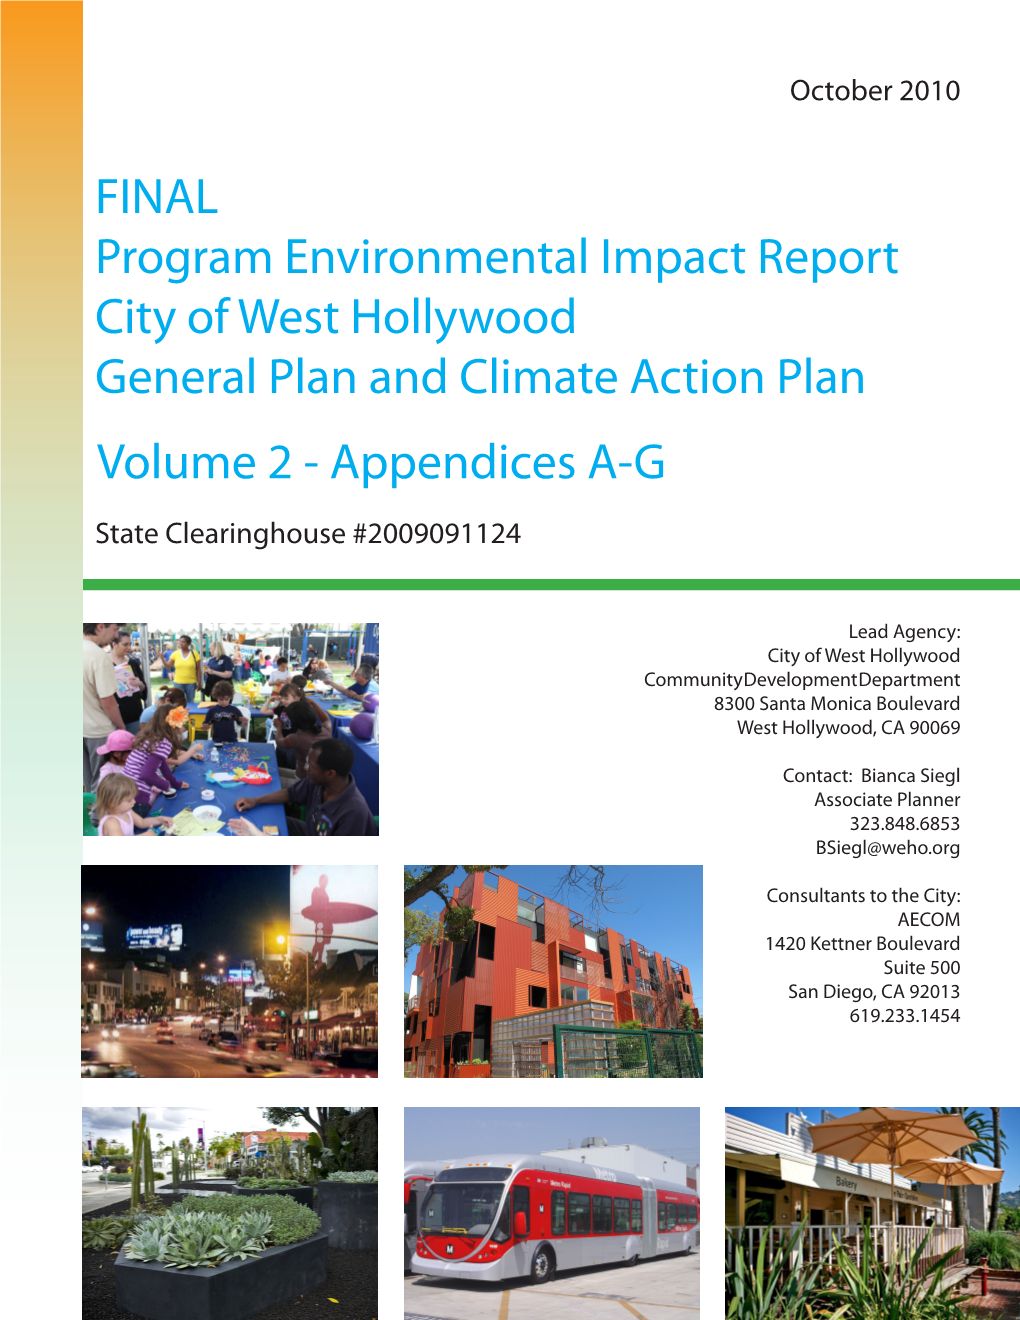 FINAL Program Environmental Impact Report City of West Hollywood General Plan and Climate Action Plan Volume 2 - Appendices A-G State Clearinghouse #2009091124